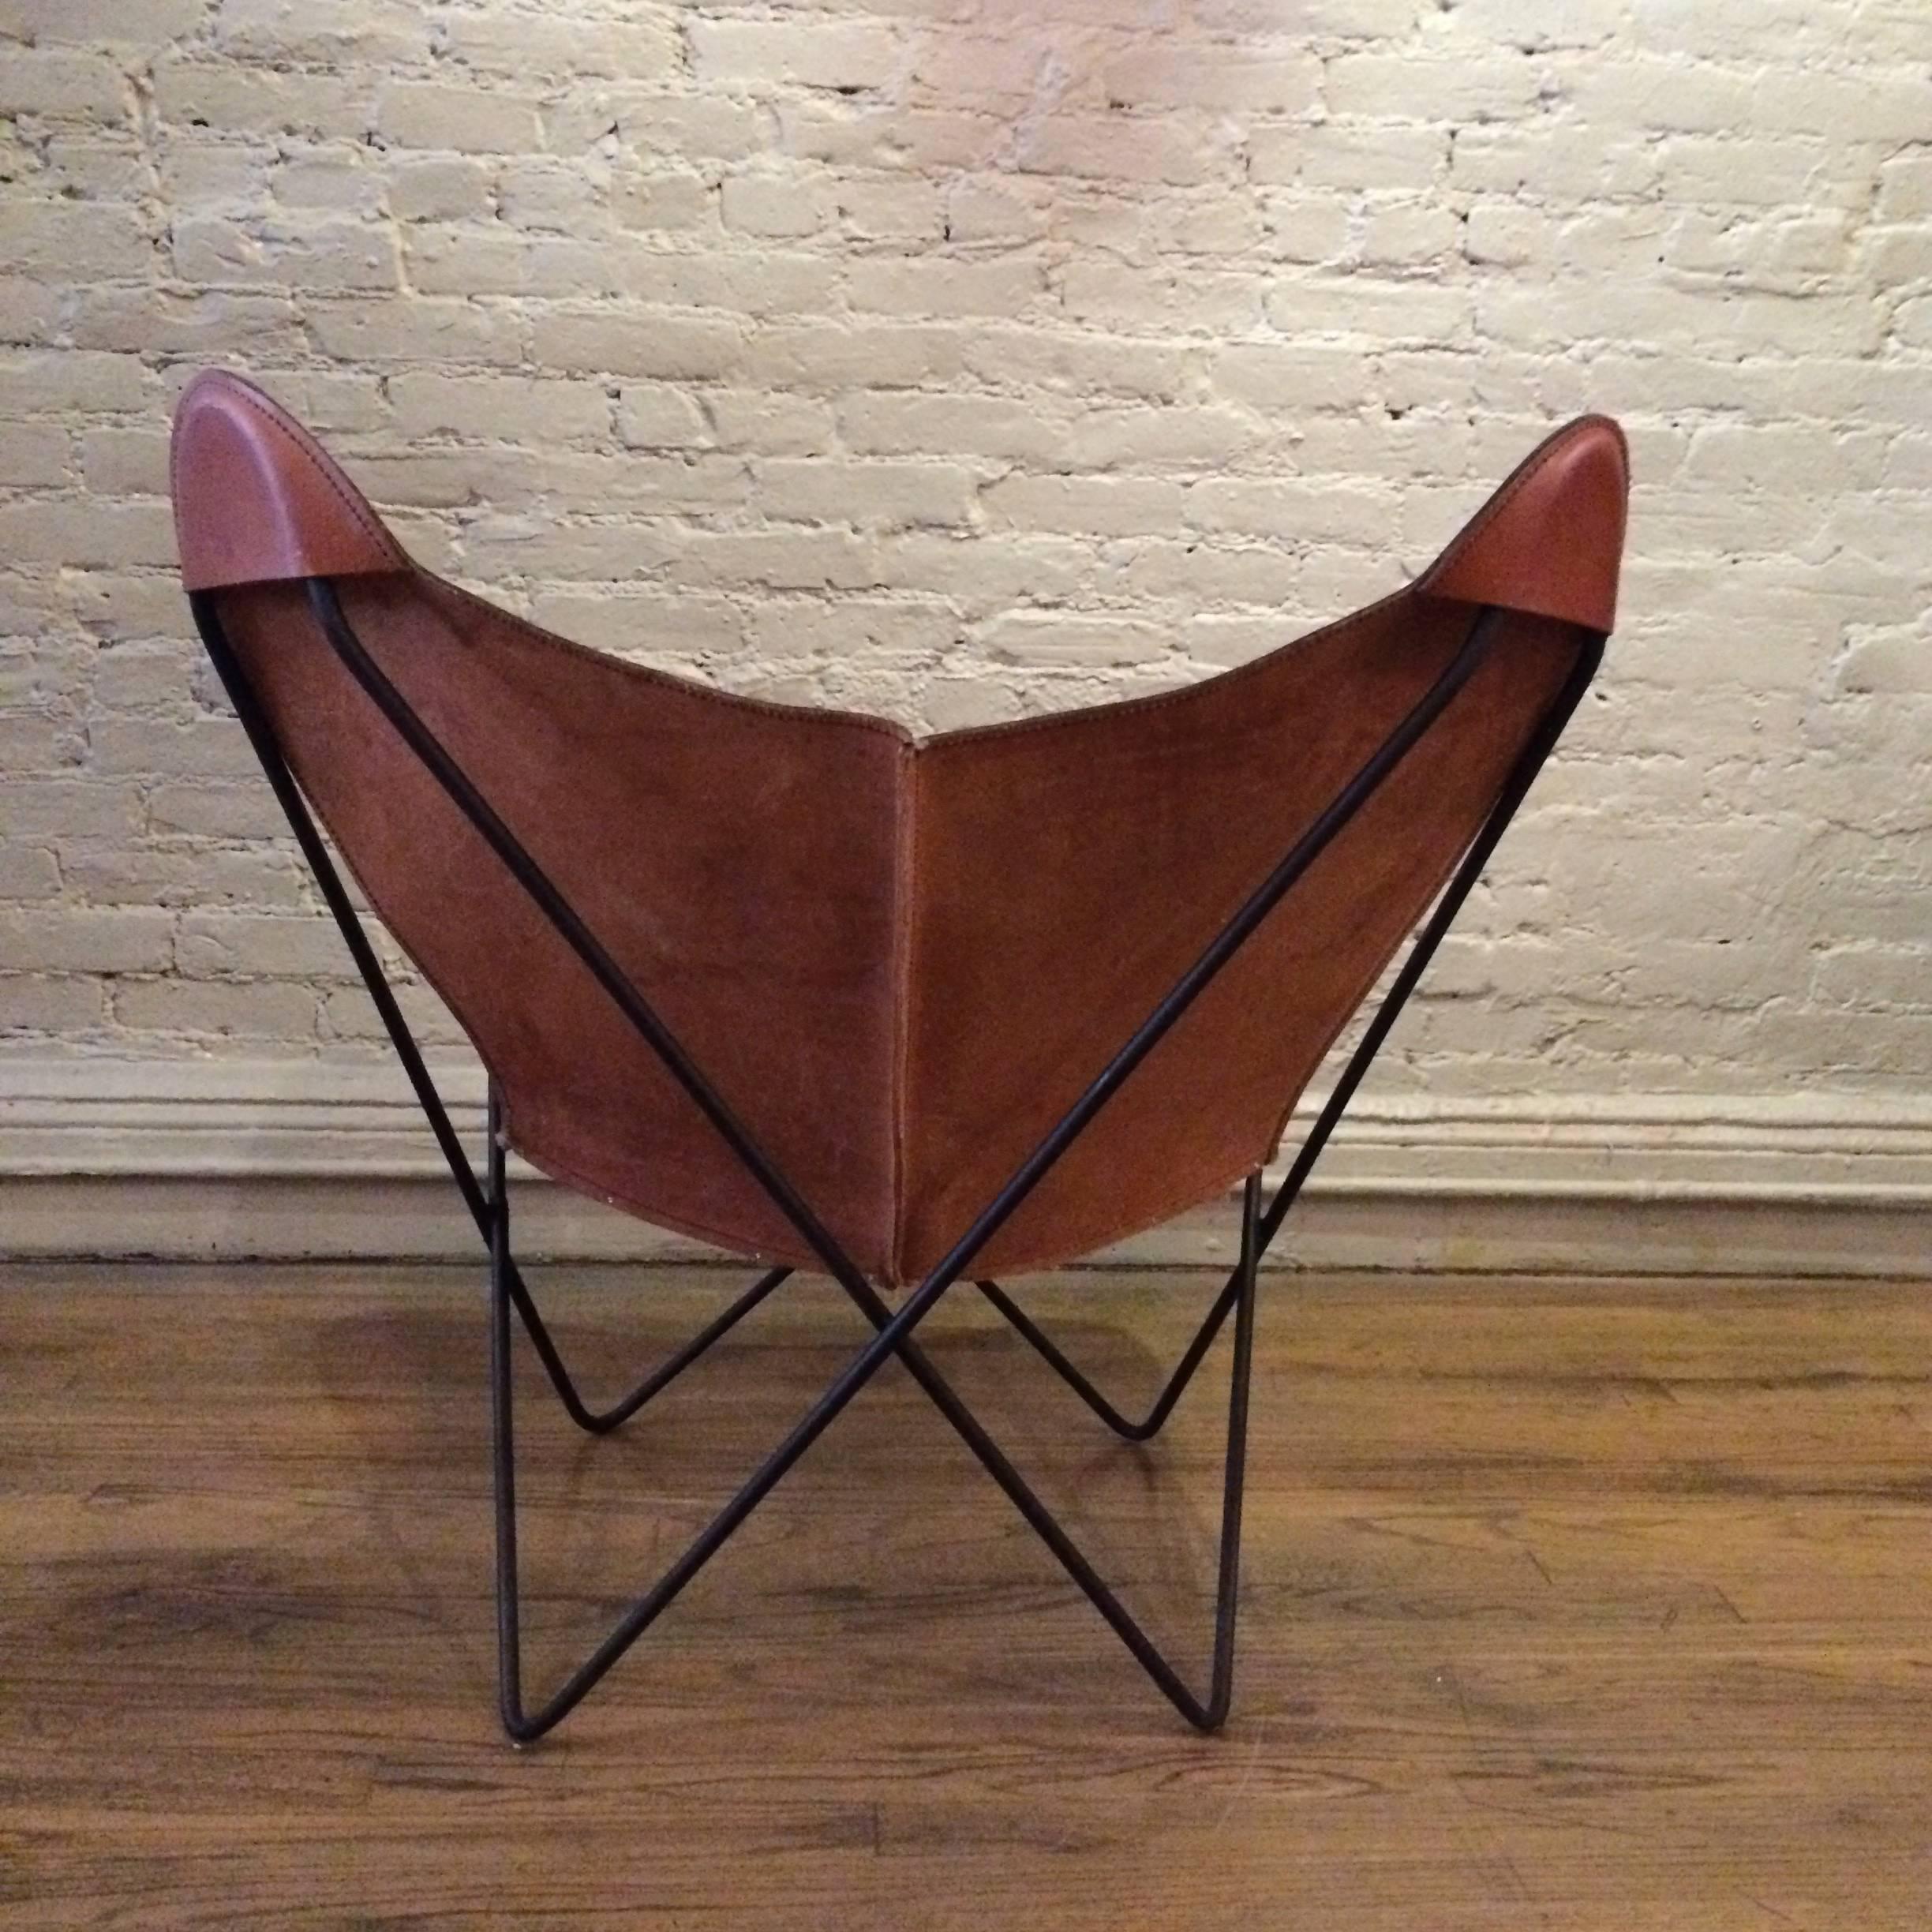 Mid-Century Modern Leather Butterfly Chair by Jorge Ferrari-Hardoy for Knoll